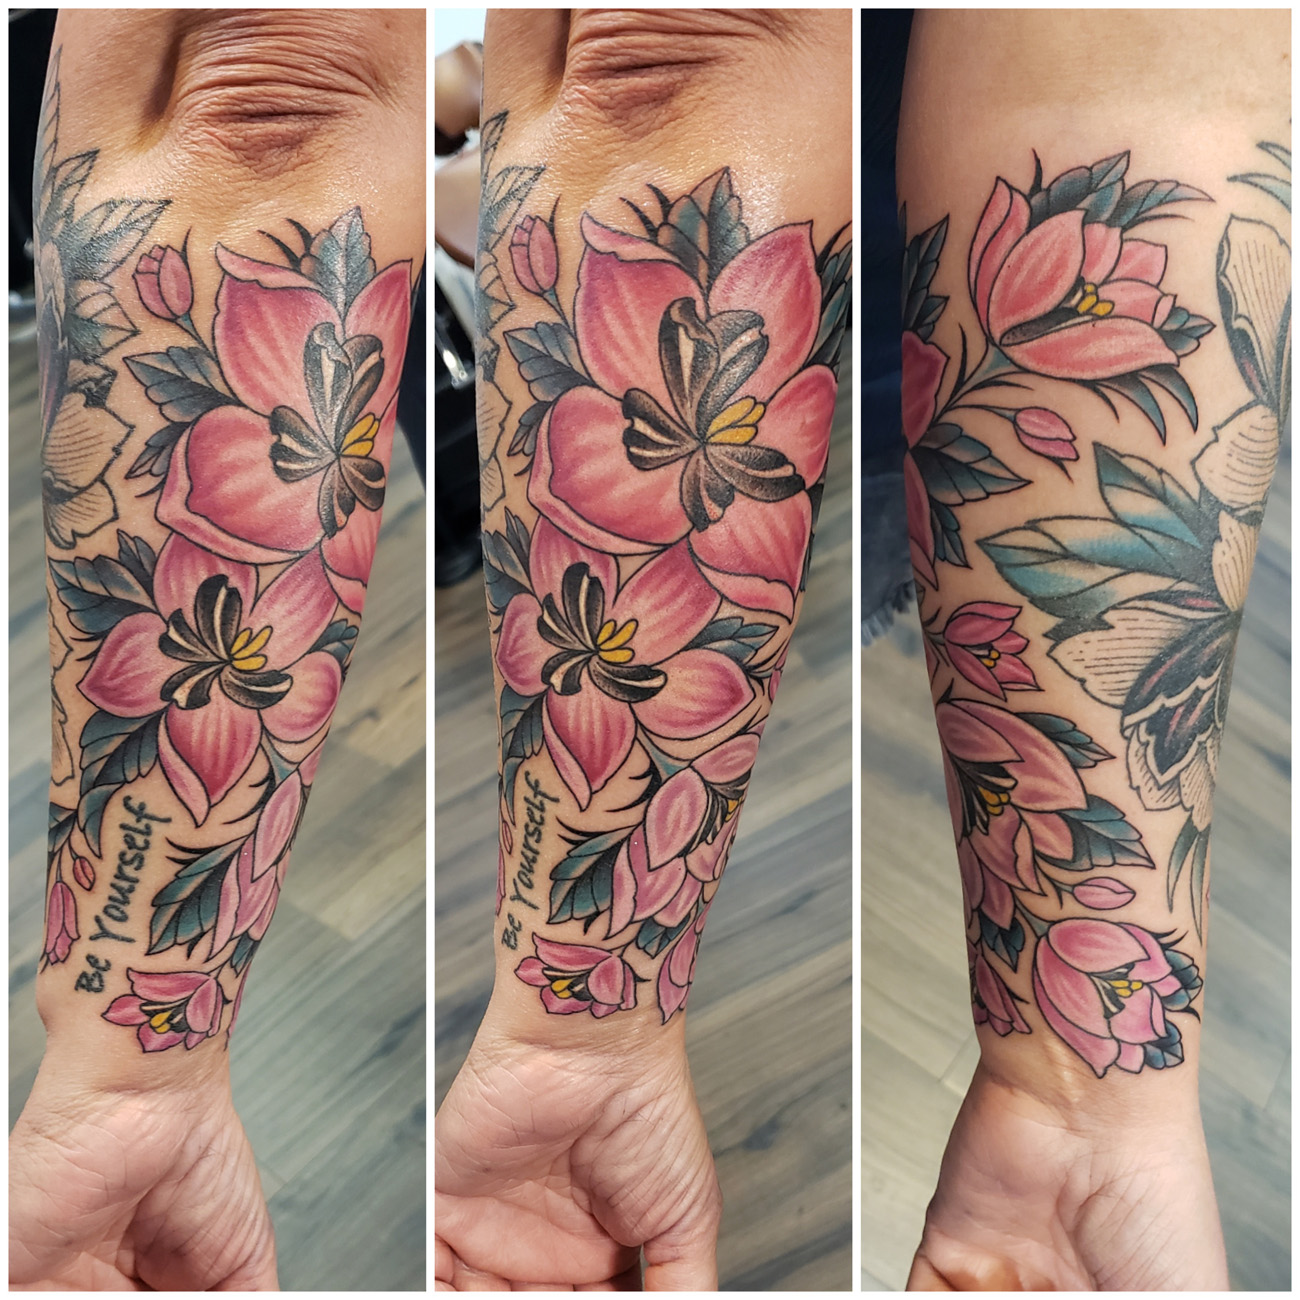 Lunatic Tattoo - Flowers and heart stone by Danielle. .  @danielle_lunatictattoo #danielle #lunatictattoo #lunatics #lunatic #tattoo  #tattoos #tattooed #tattooing #ink #inks #inked #inking #colors #color # flowers #plumeria #heart #gemstone | Facebook